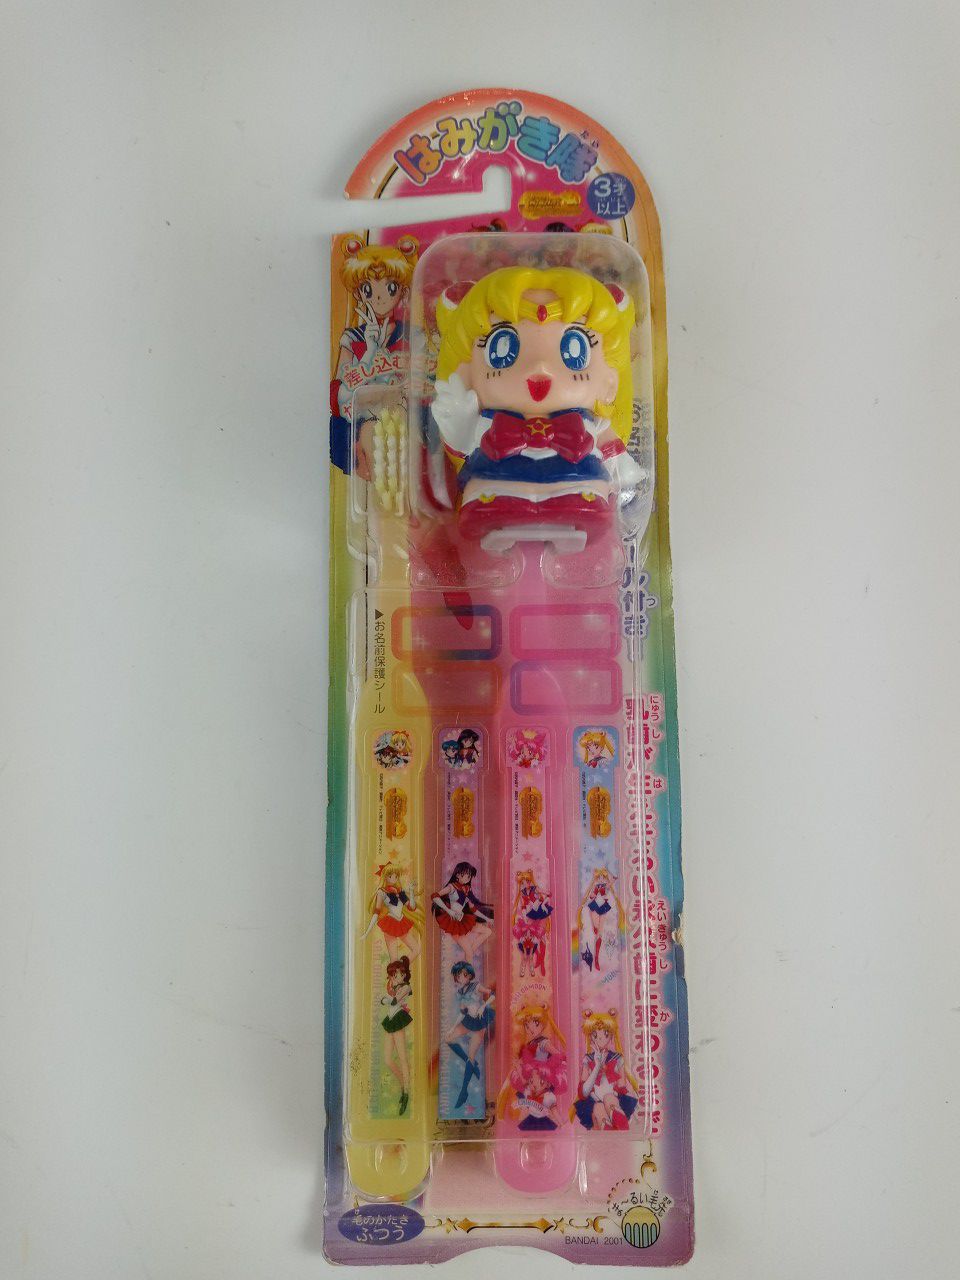 Vintage 2001 Bandai Sailor Moon Toothbrushs & Cover. New in USA